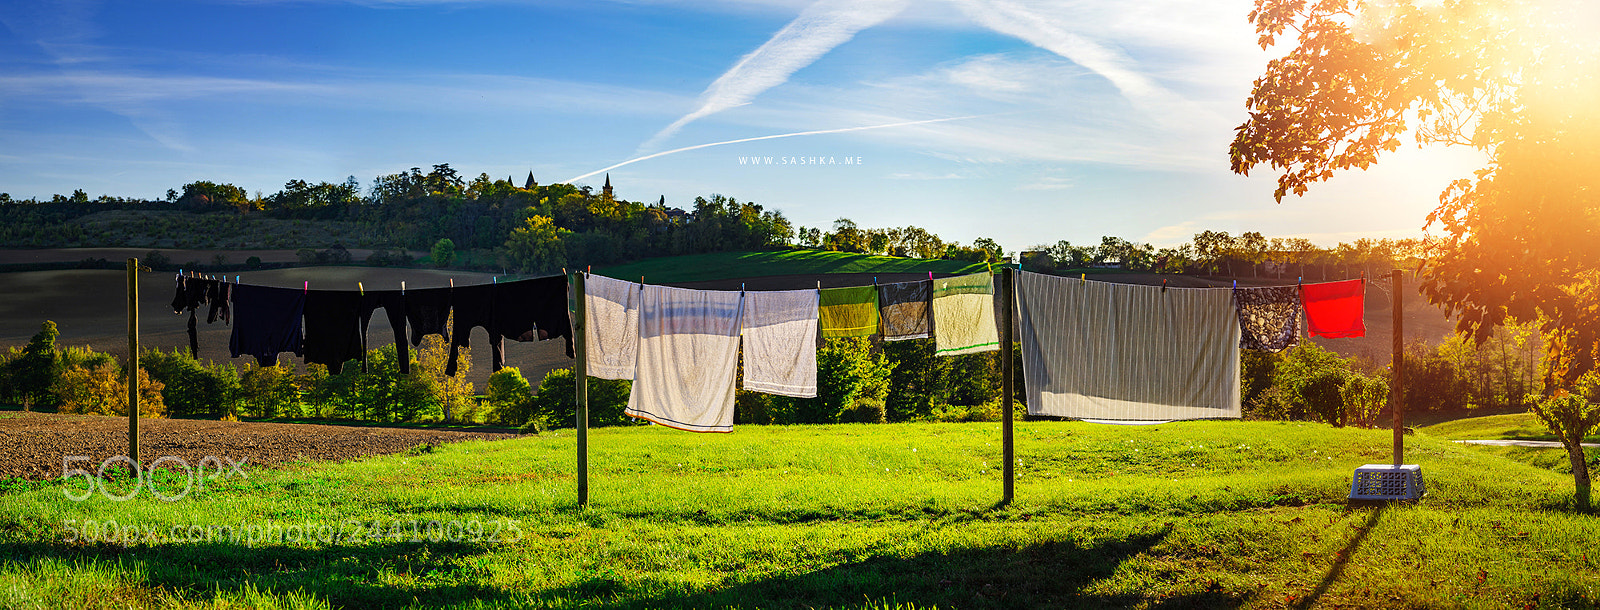 Sony a99 II sample photo. Line of underwear drying photography